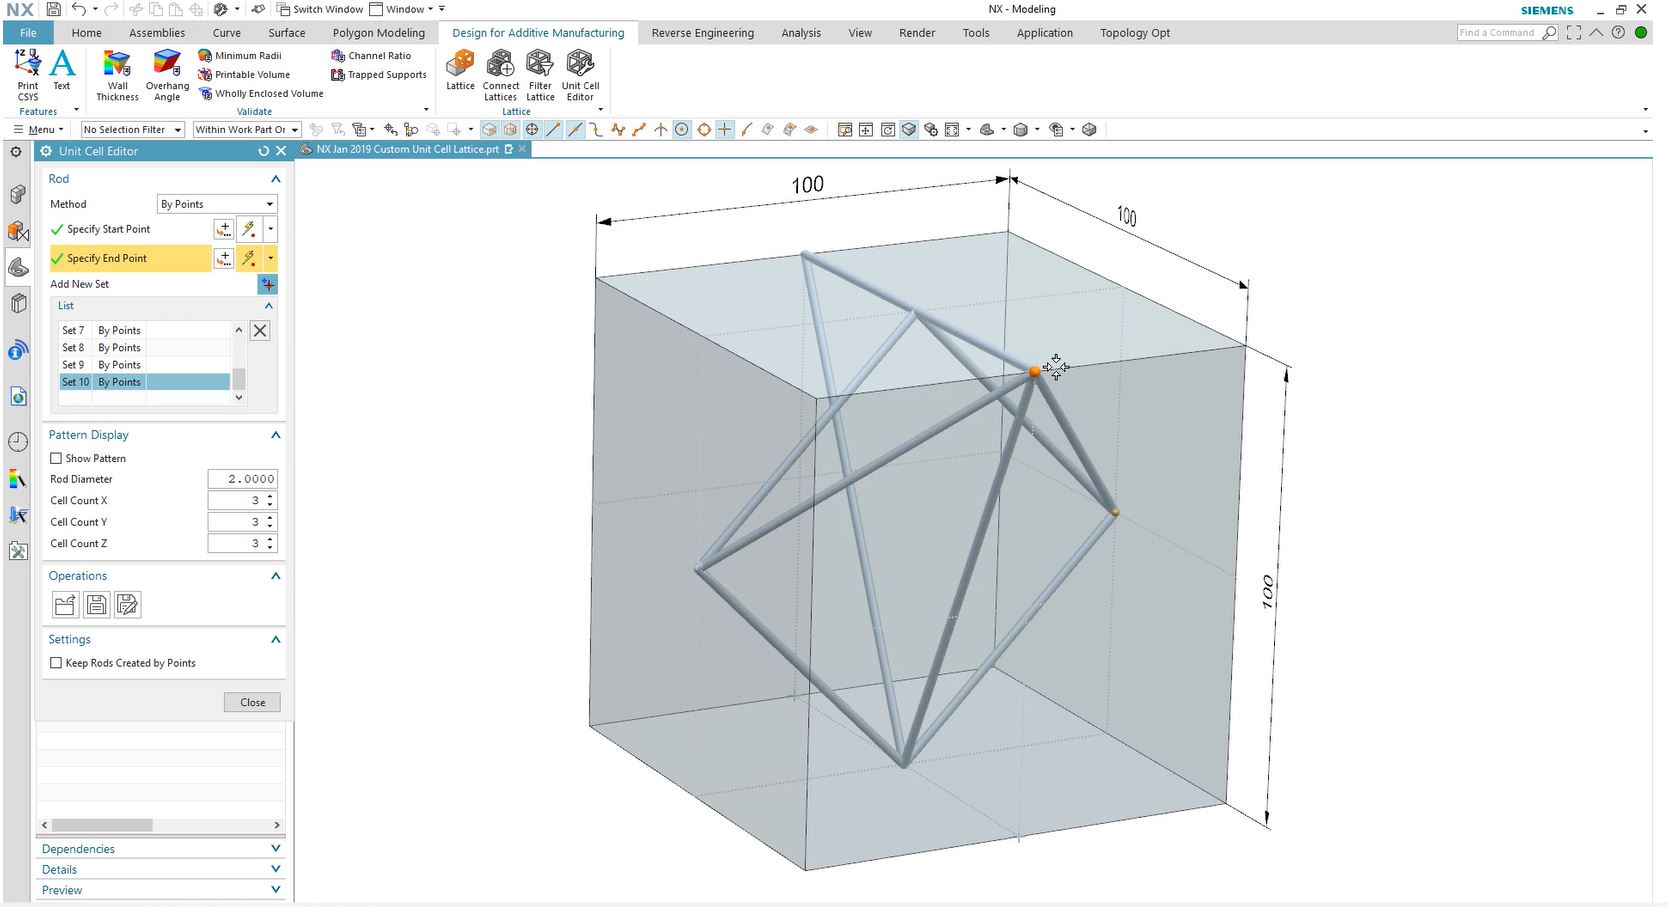 Sneak Preview: Create Your Own Lattice Structures - NX Design